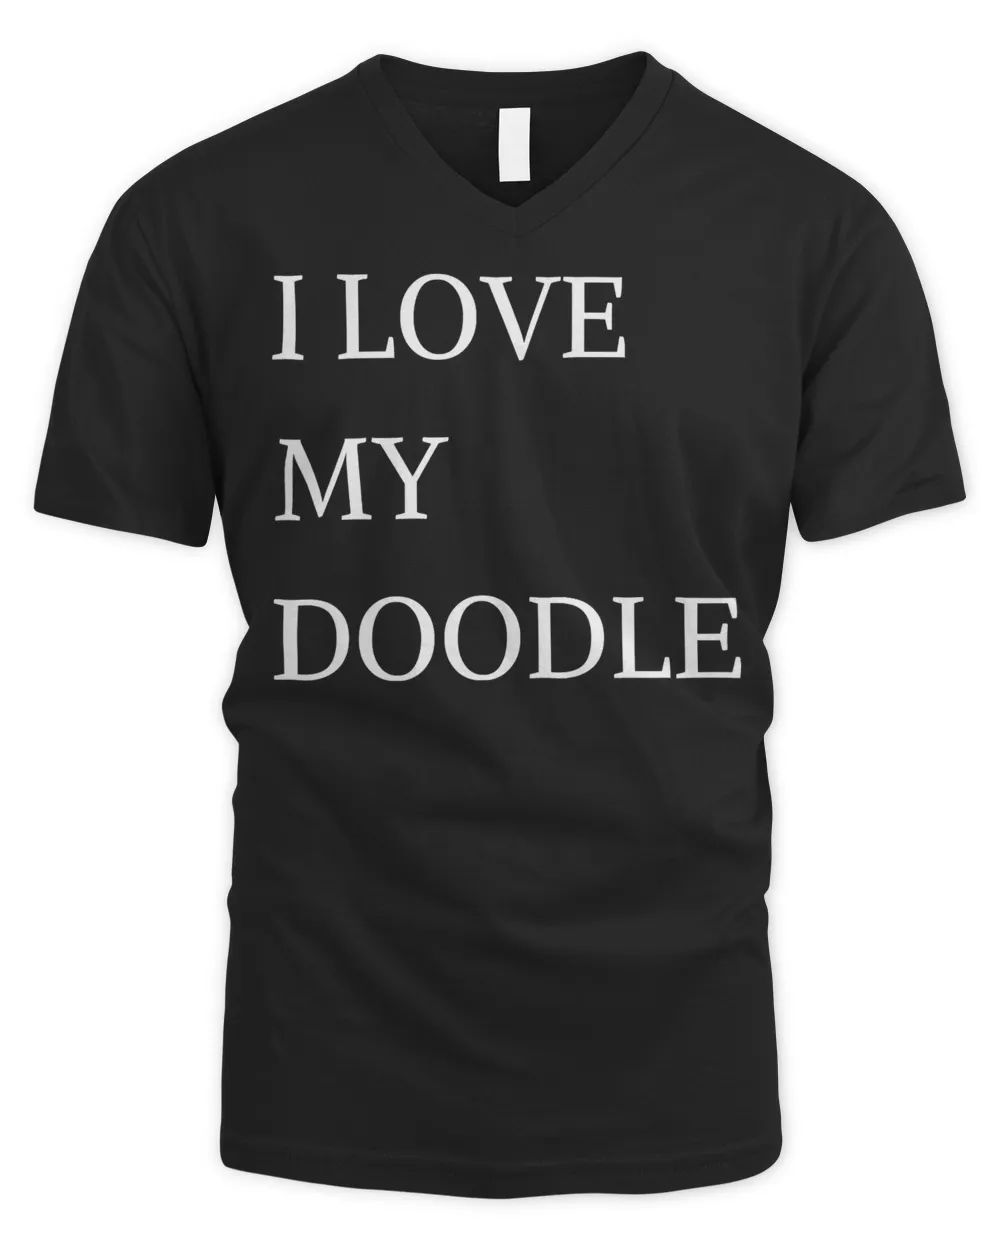 OFFICIAL I LOVE MY DOODLE T-SHIRT